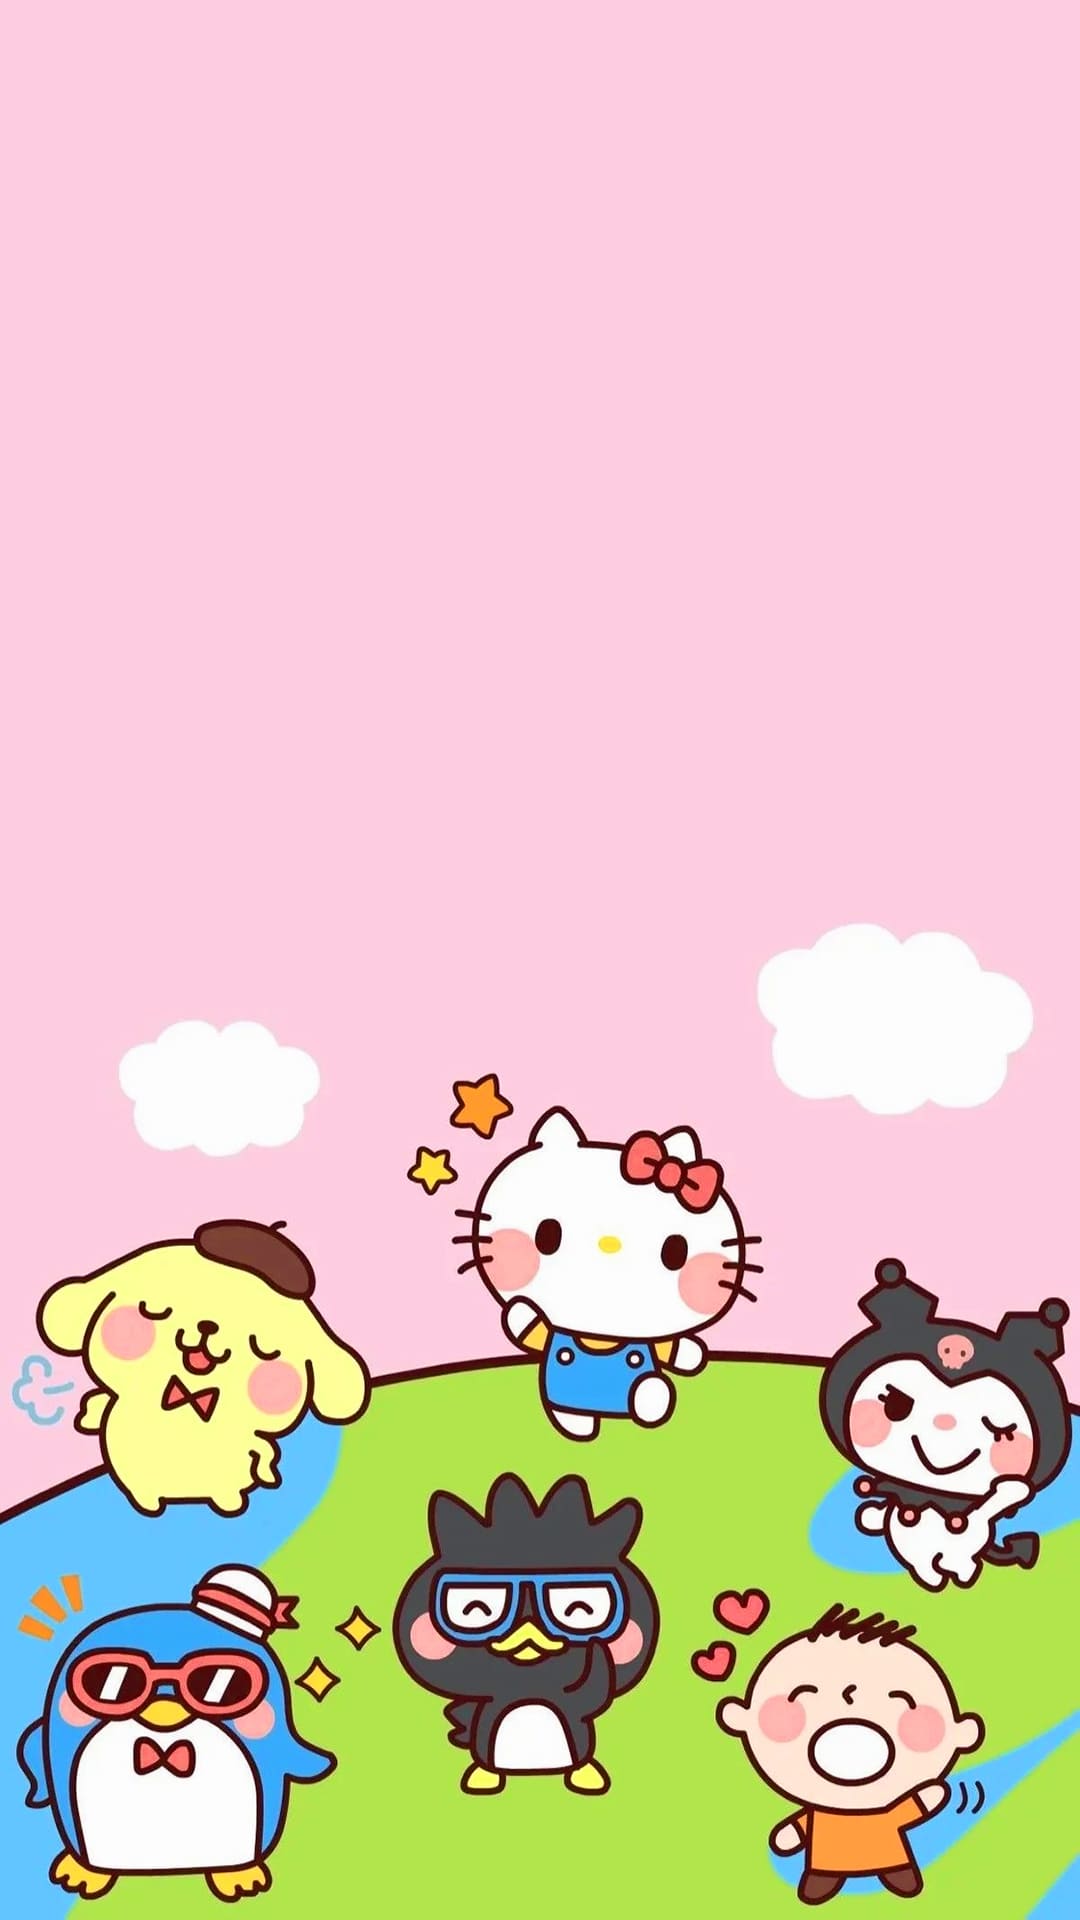 hello-kitty-and-friends-wallpaper-tubewp